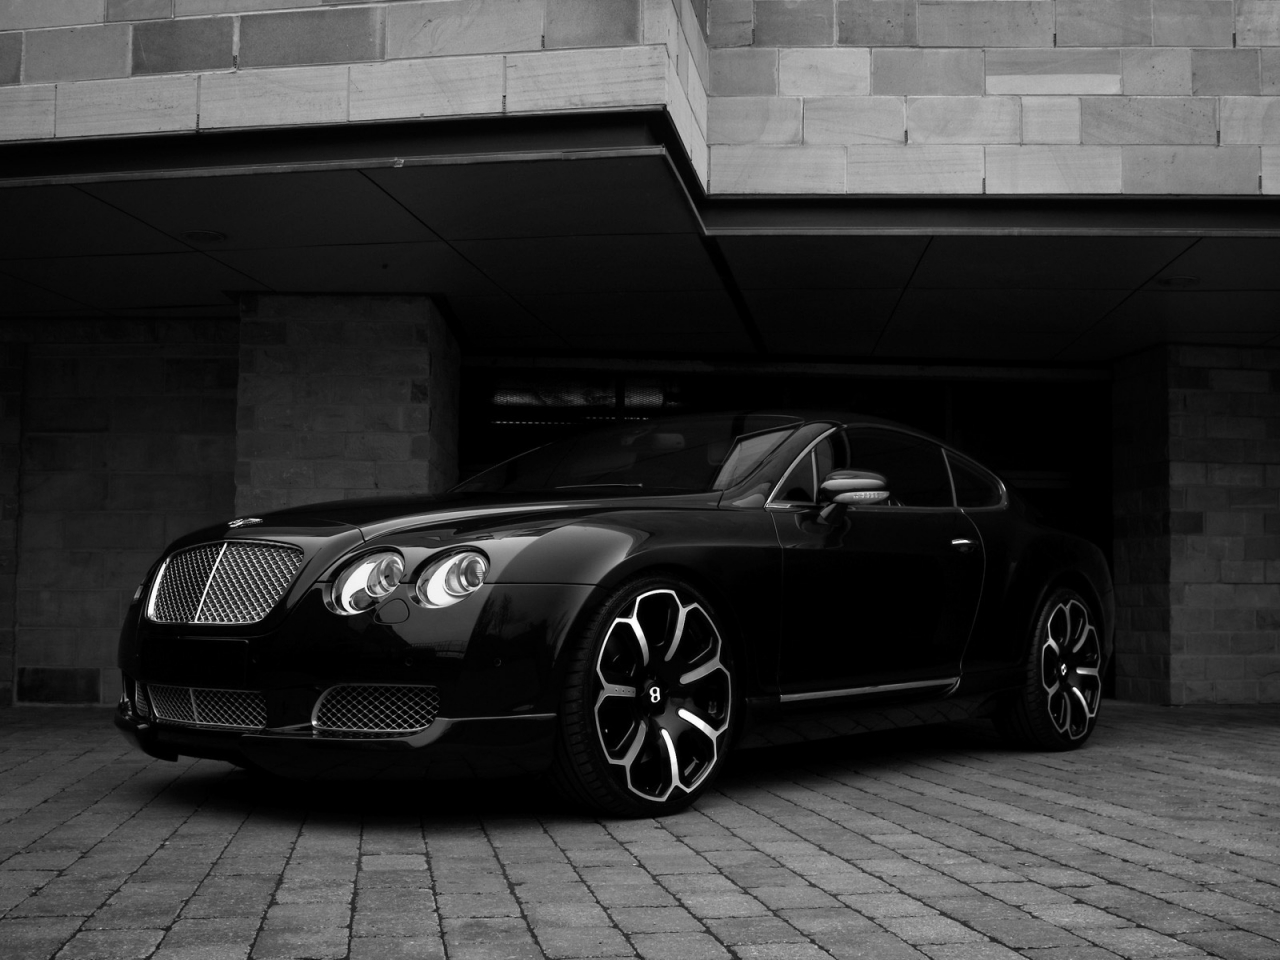 Bentley GTS Black Edition Project Kahn 2008 Overhang for 1280 x 960 resolution